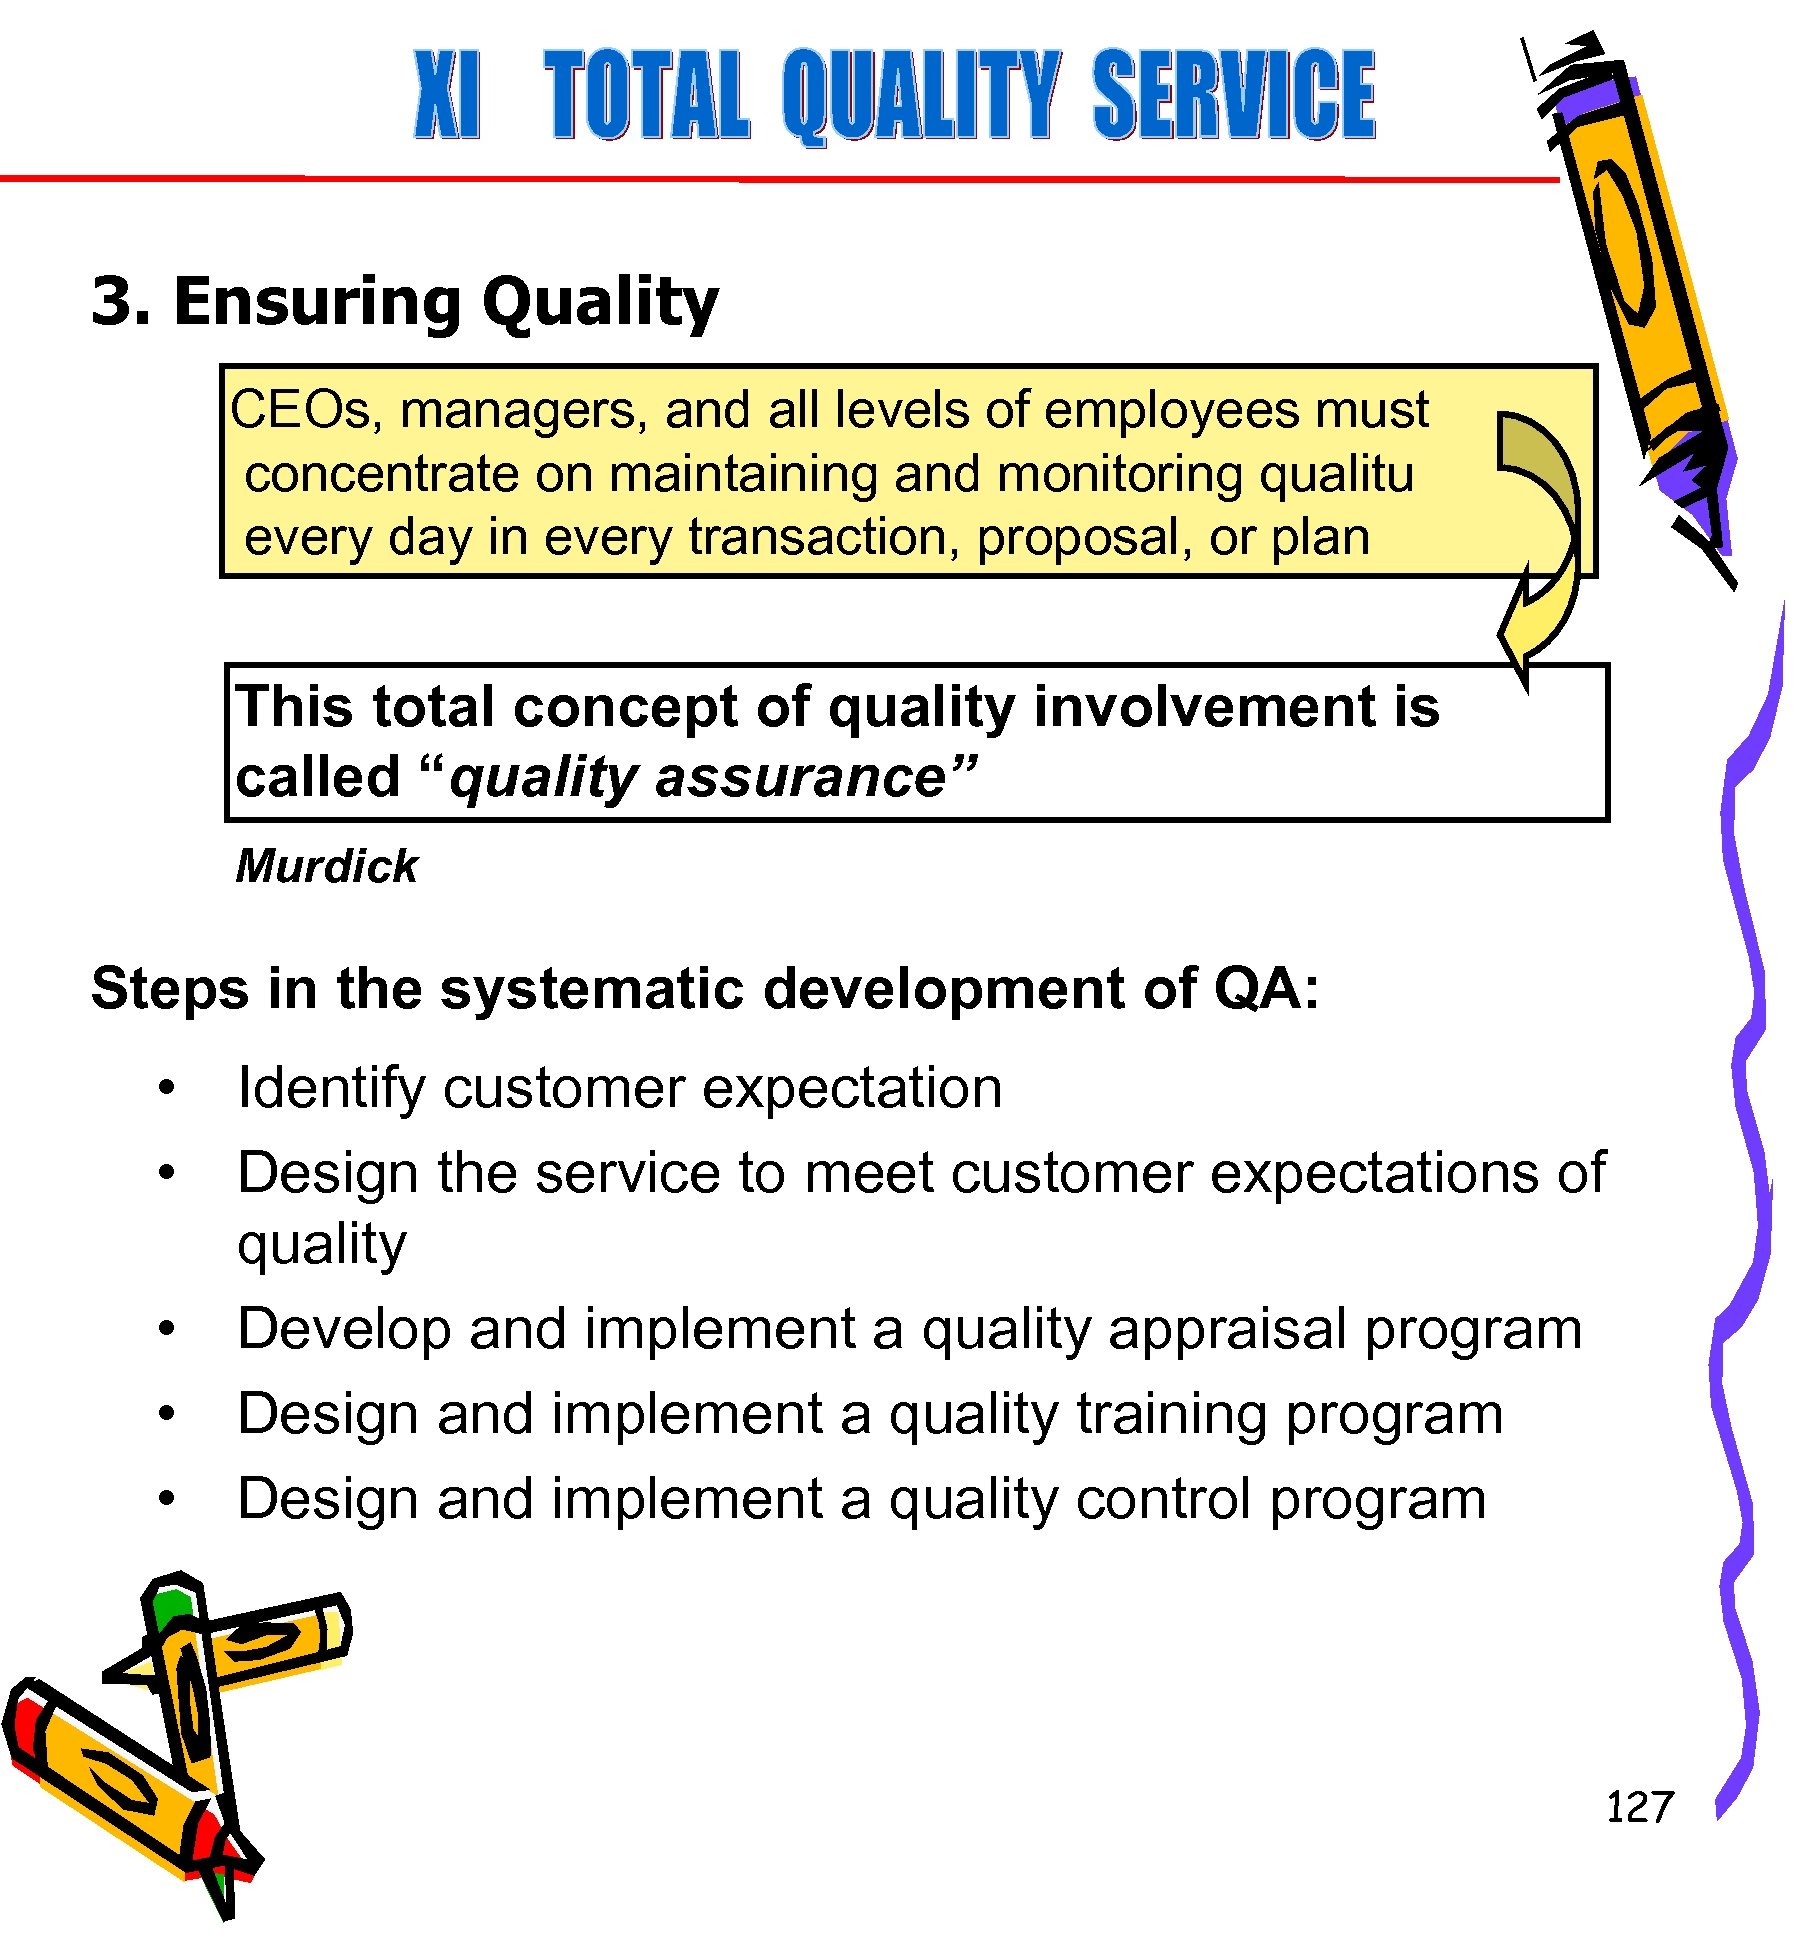 3. Ensuring Quality CEOs, managers, and all levels of employees must concentrate on maintaining